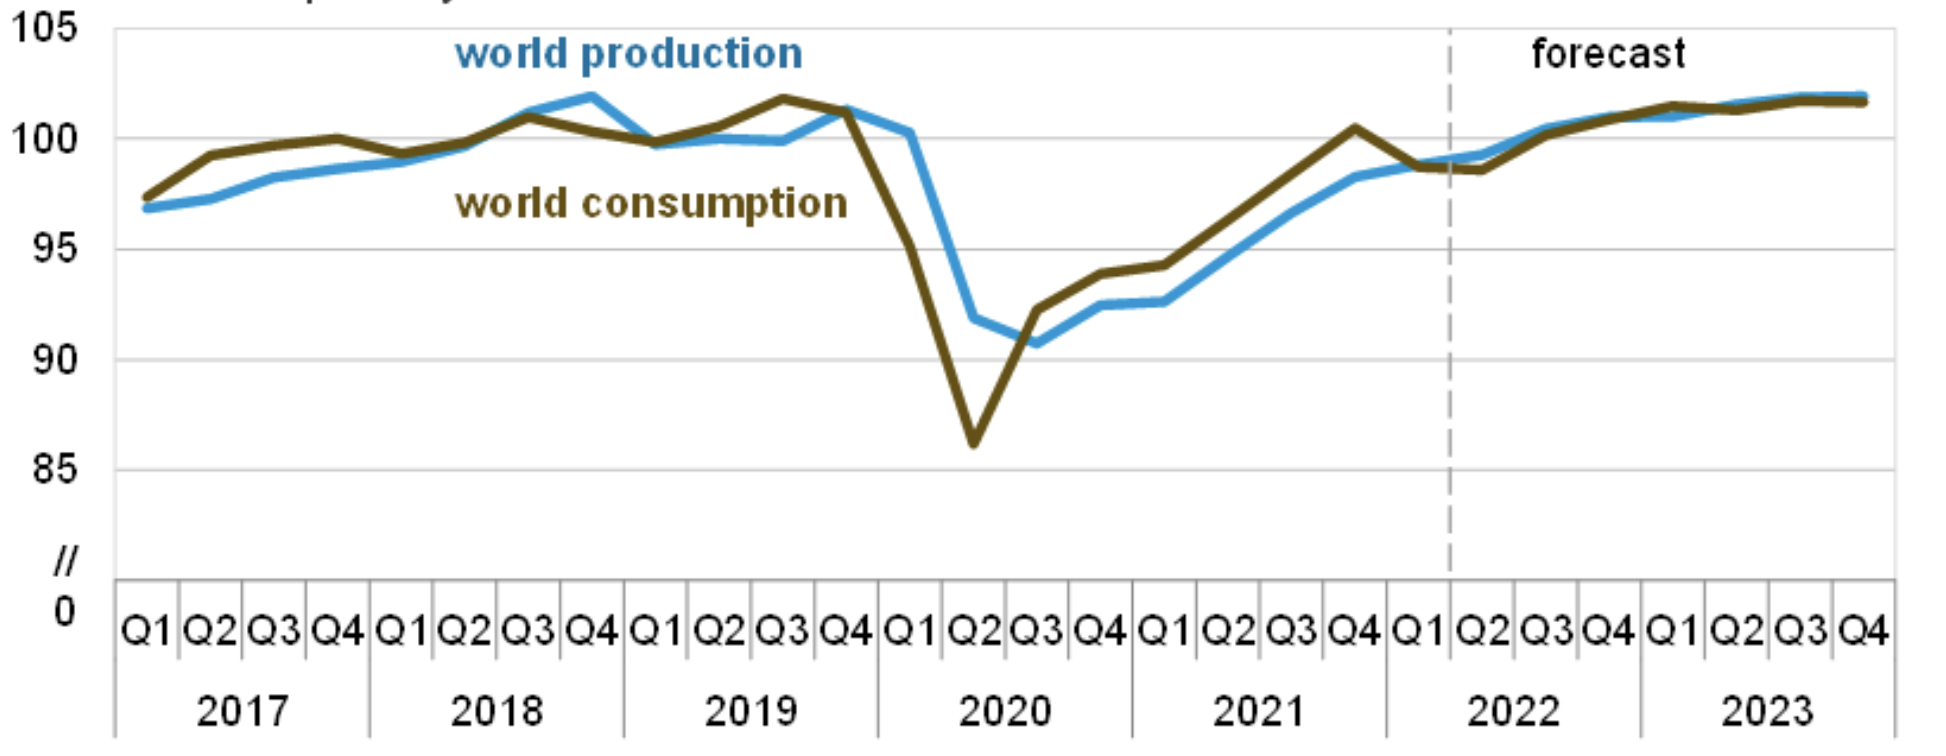 global-oil-production-may-2022.png